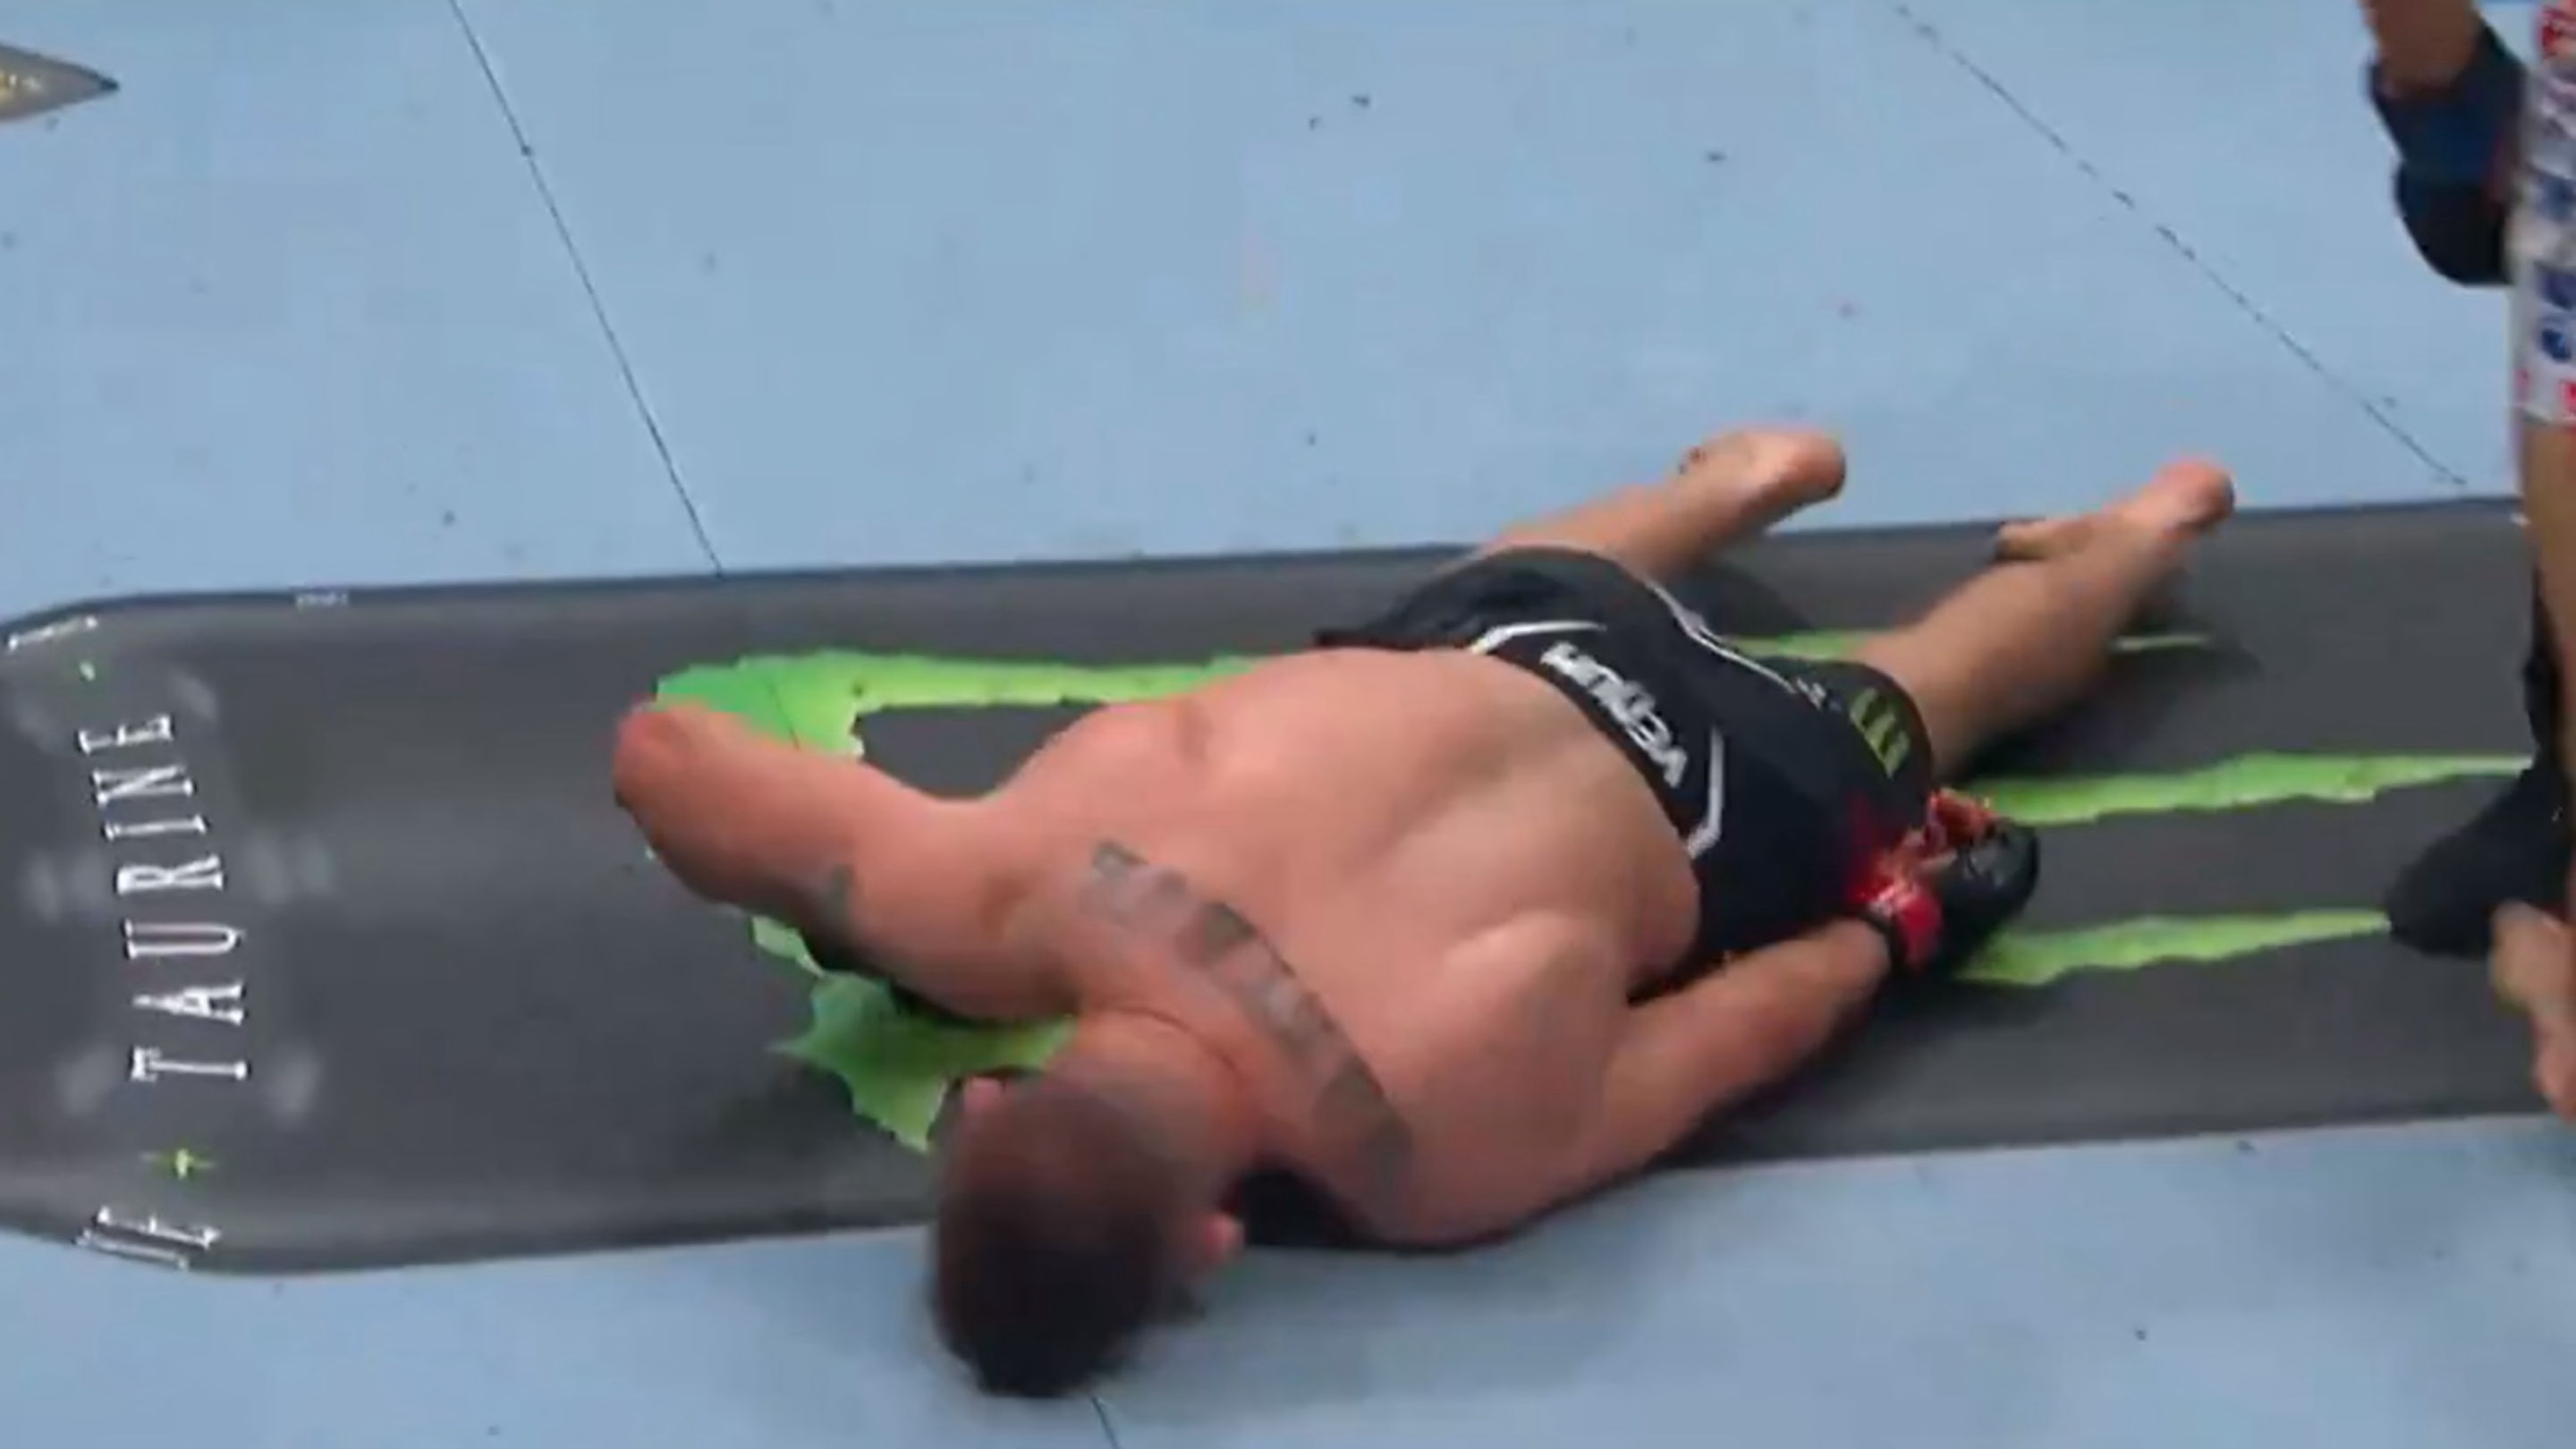 Max Holloway Brutally Knocked Out Justin Gaethje With 1 Second Left at
UFC 300